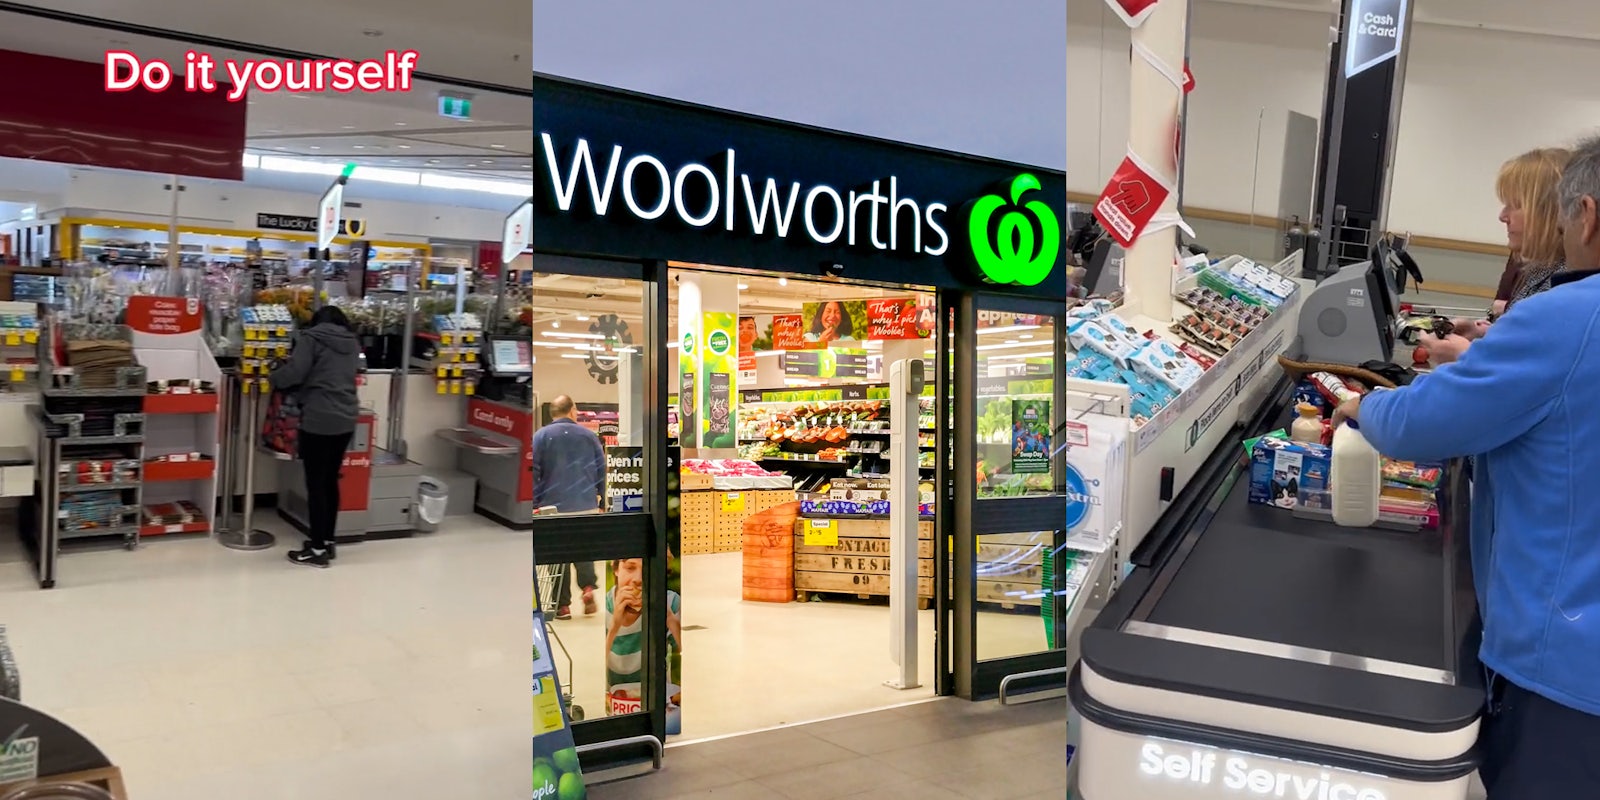 Woolworths self checkout with caption 'Do it yourself' (l) Woolworths store entrance with sign (c) Woolworths customers at checkout (r)